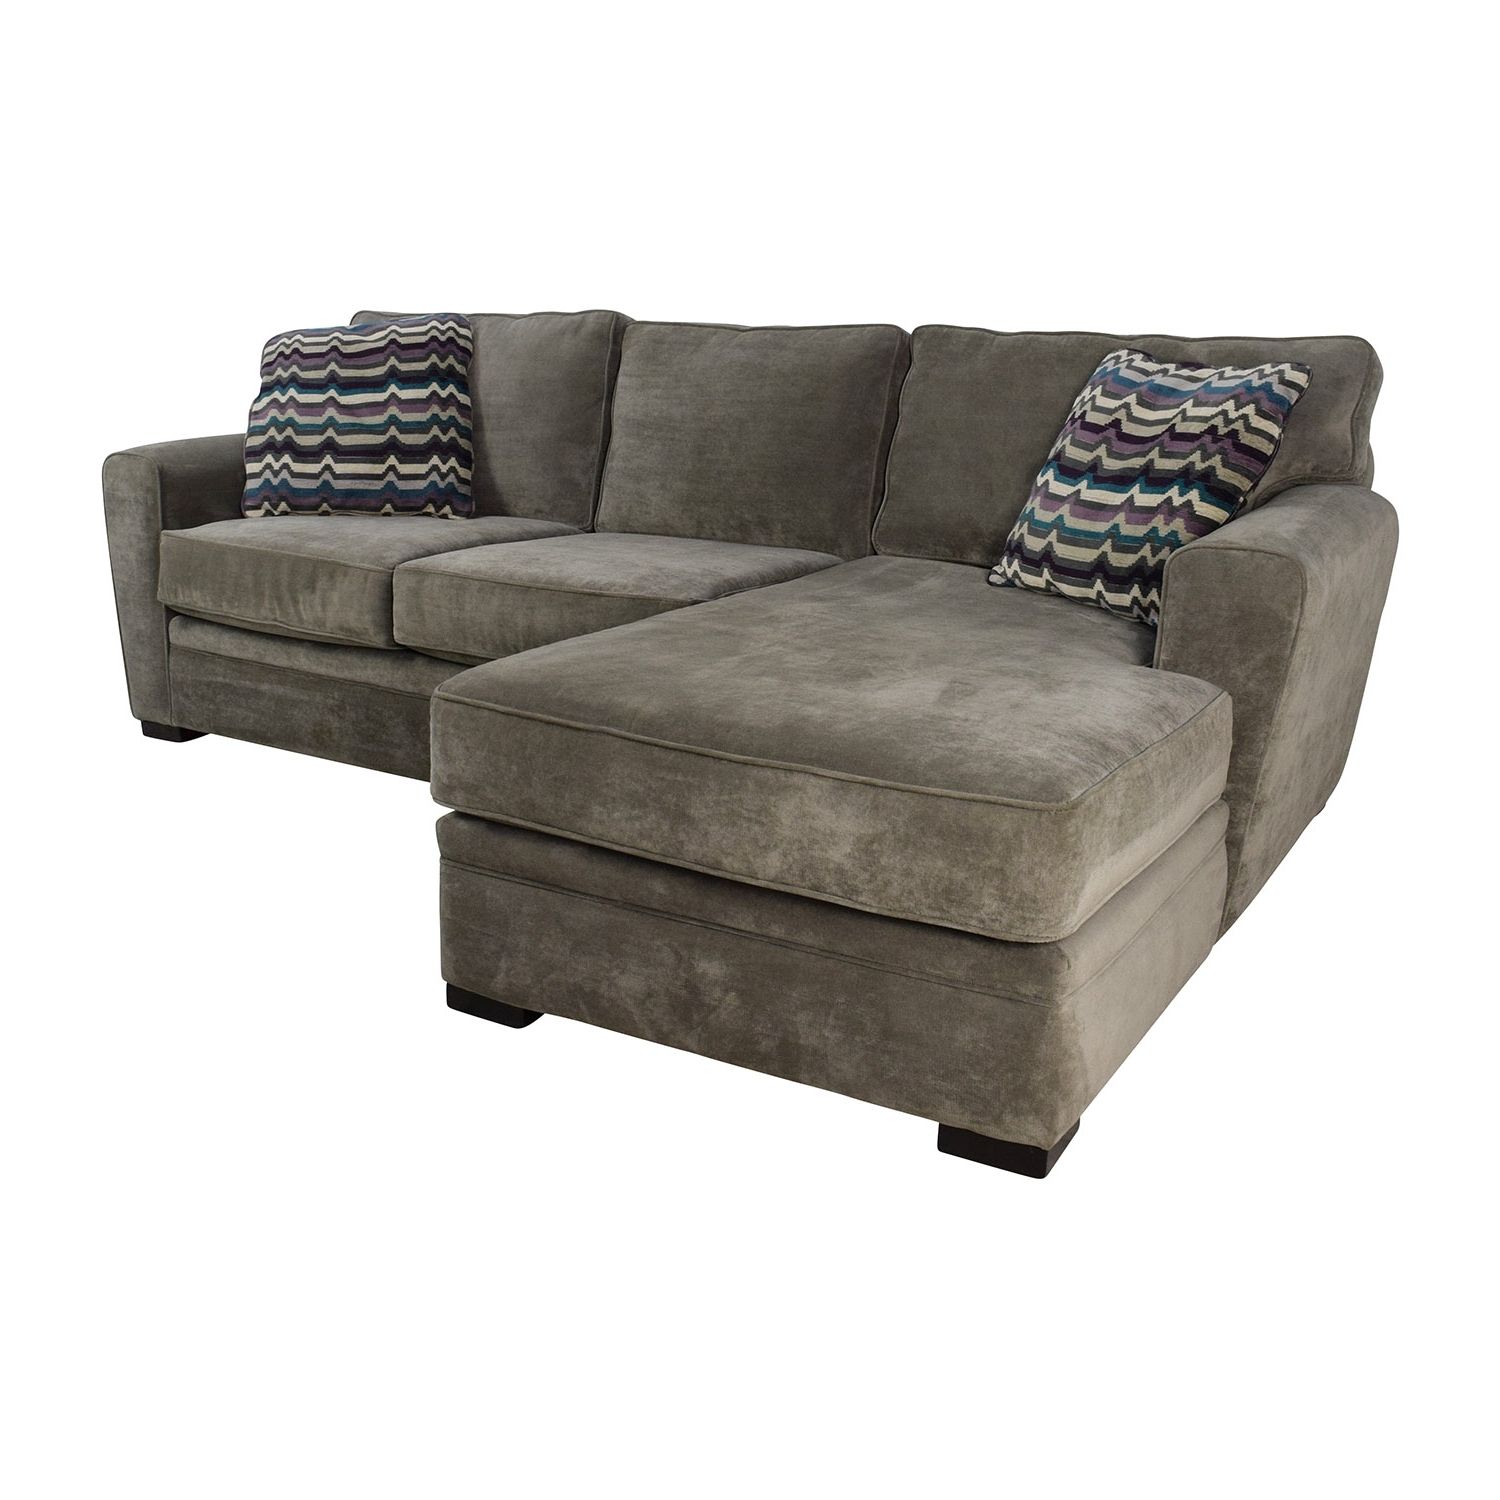 [%52% Off – Raymour & Flanigan Raymour & Flanigan Artemis Ii For Favorite Sectional Sofas At Raymour And Flanigan|sectional Sofas At Raymour And Flanigan Throughout 2019 52% Off – Raymour & Flanigan Raymour & Flanigan Artemis Ii|fashionable Sectional Sofas At Raymour And Flanigan Regarding 52% Off – Raymour & Flanigan Raymour & Flanigan Artemis Ii|popular 52% Off – Raymour & Flanigan Raymour & Flanigan Artemis Ii With Regard To Sectional Sofas At Raymour And Flanigan%] (View 1 of 20)